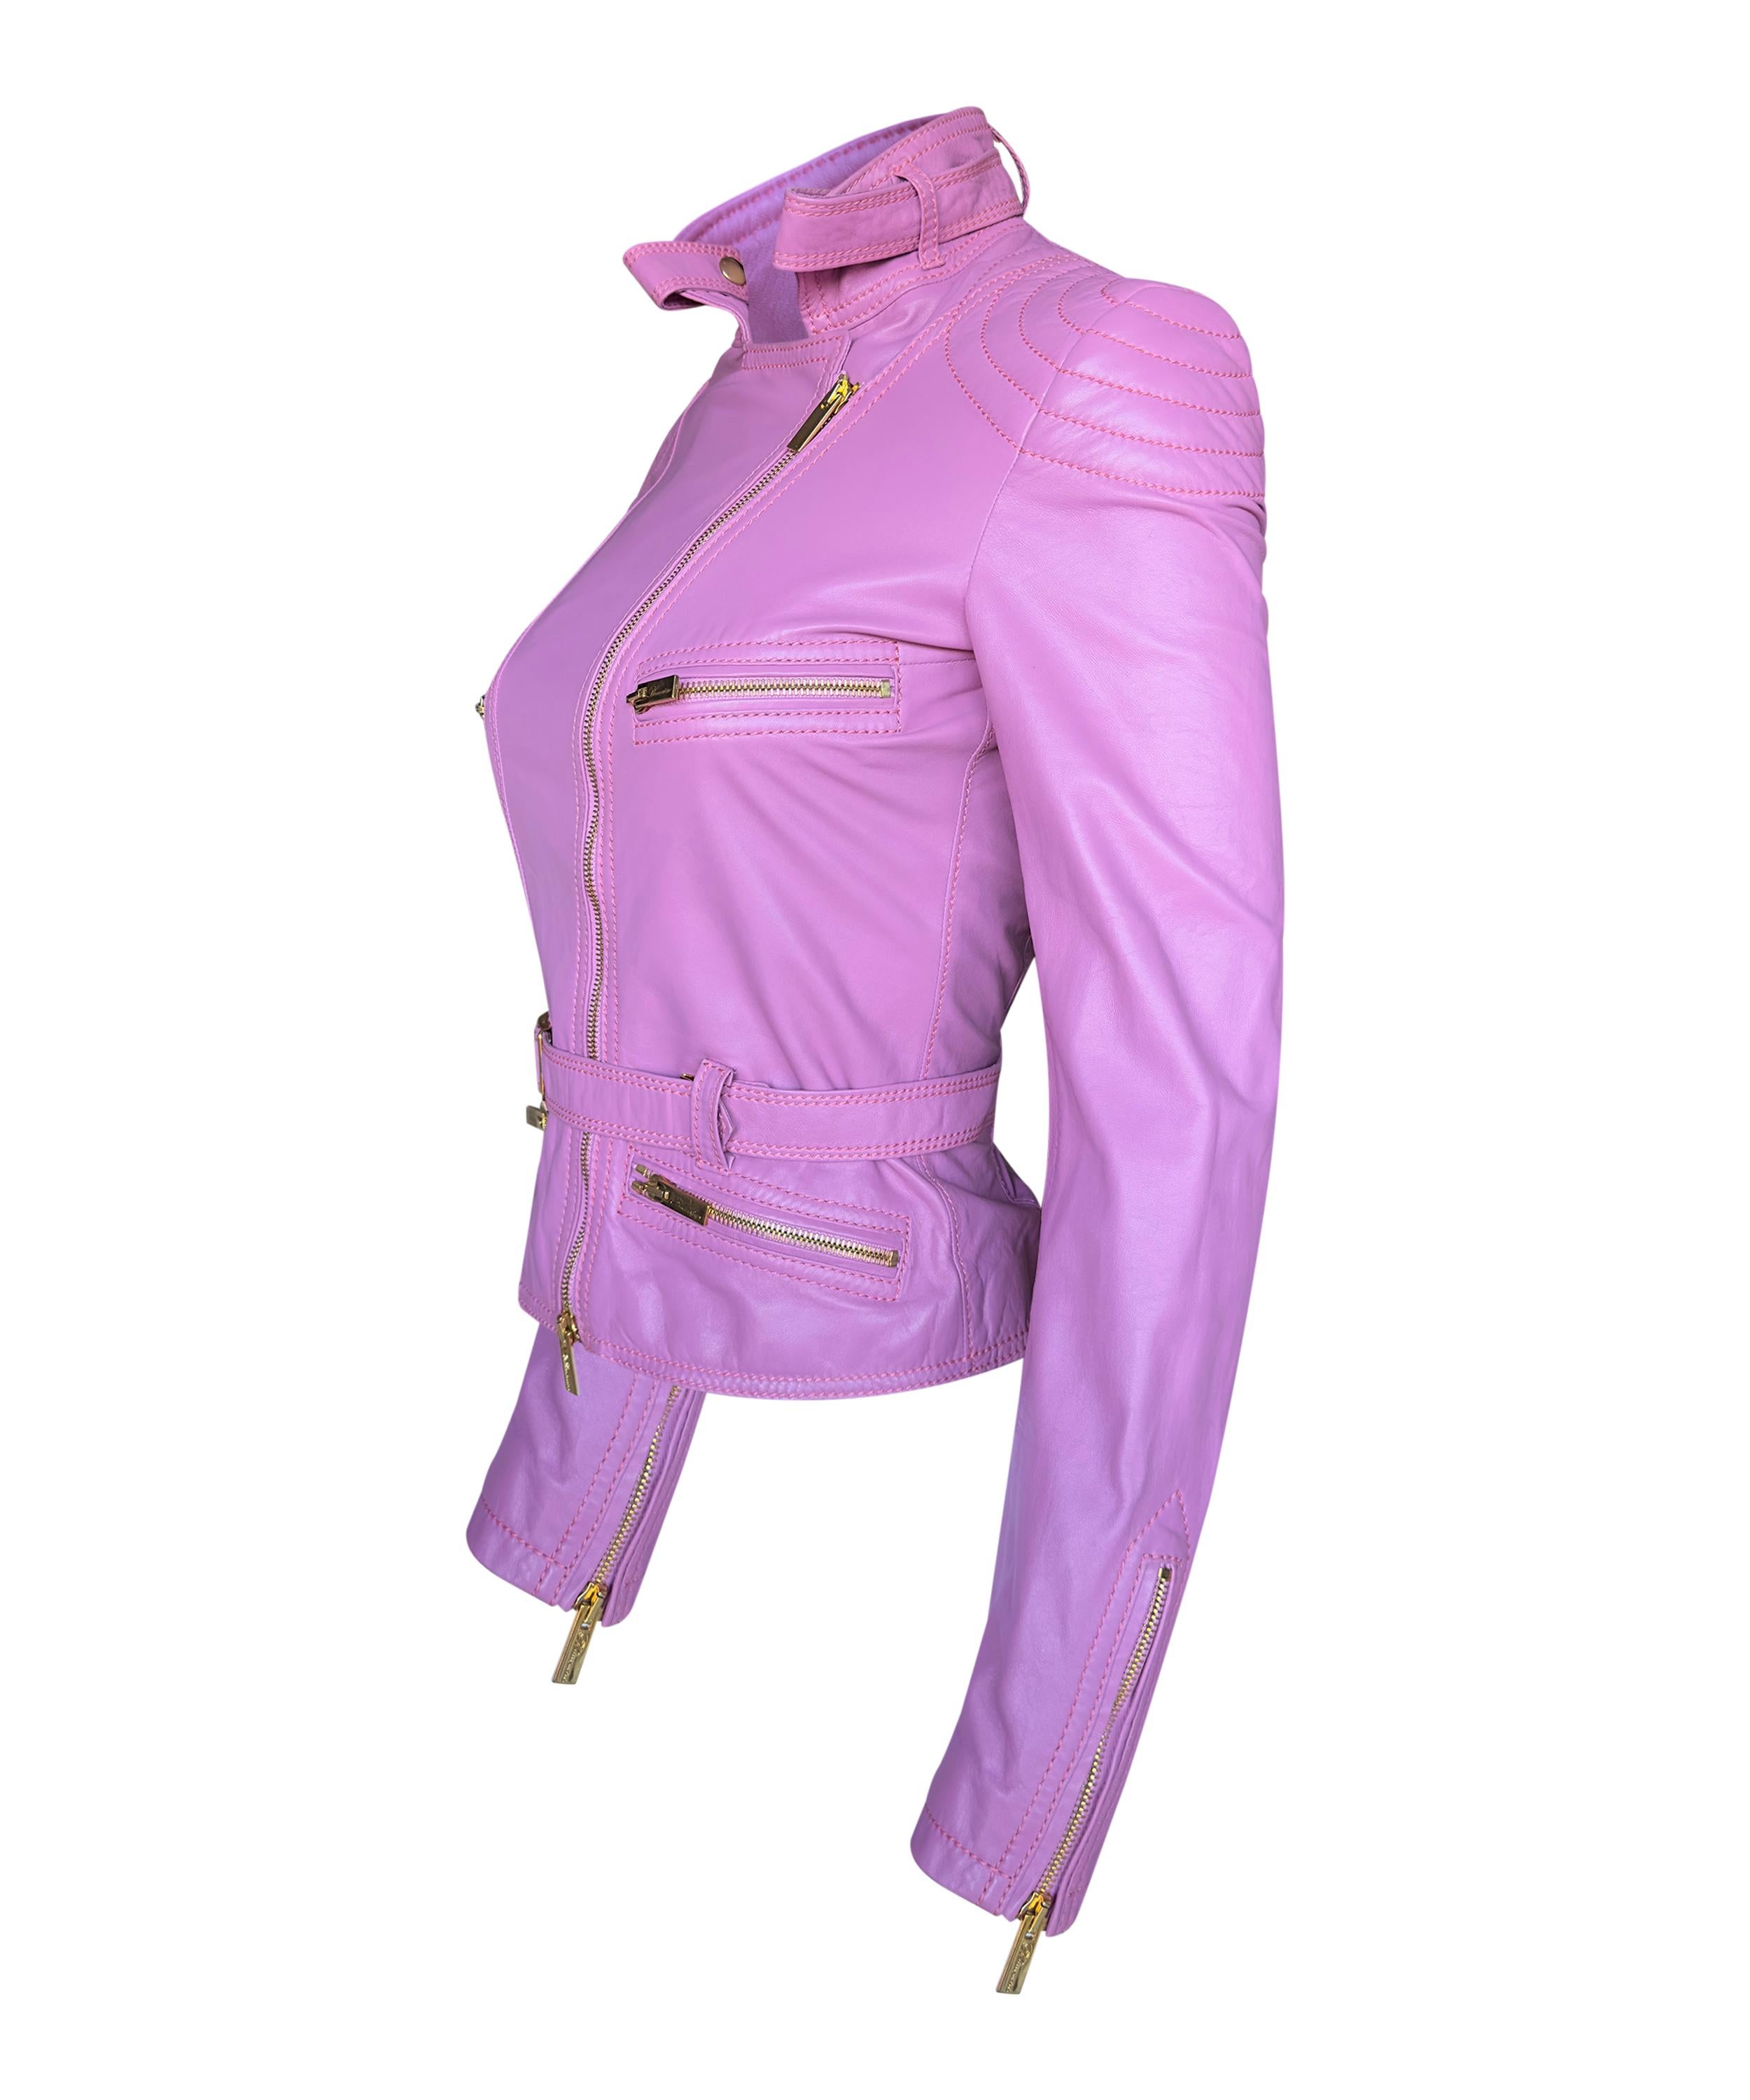 ✨Blumarine Pink Biker Leather Jacket  with Gold Hardwear and Belt
✨100% Leather and silk lined 
✨Very good conditions, minor use on the hardware from storage 
✨Size XS-6UK-38IT